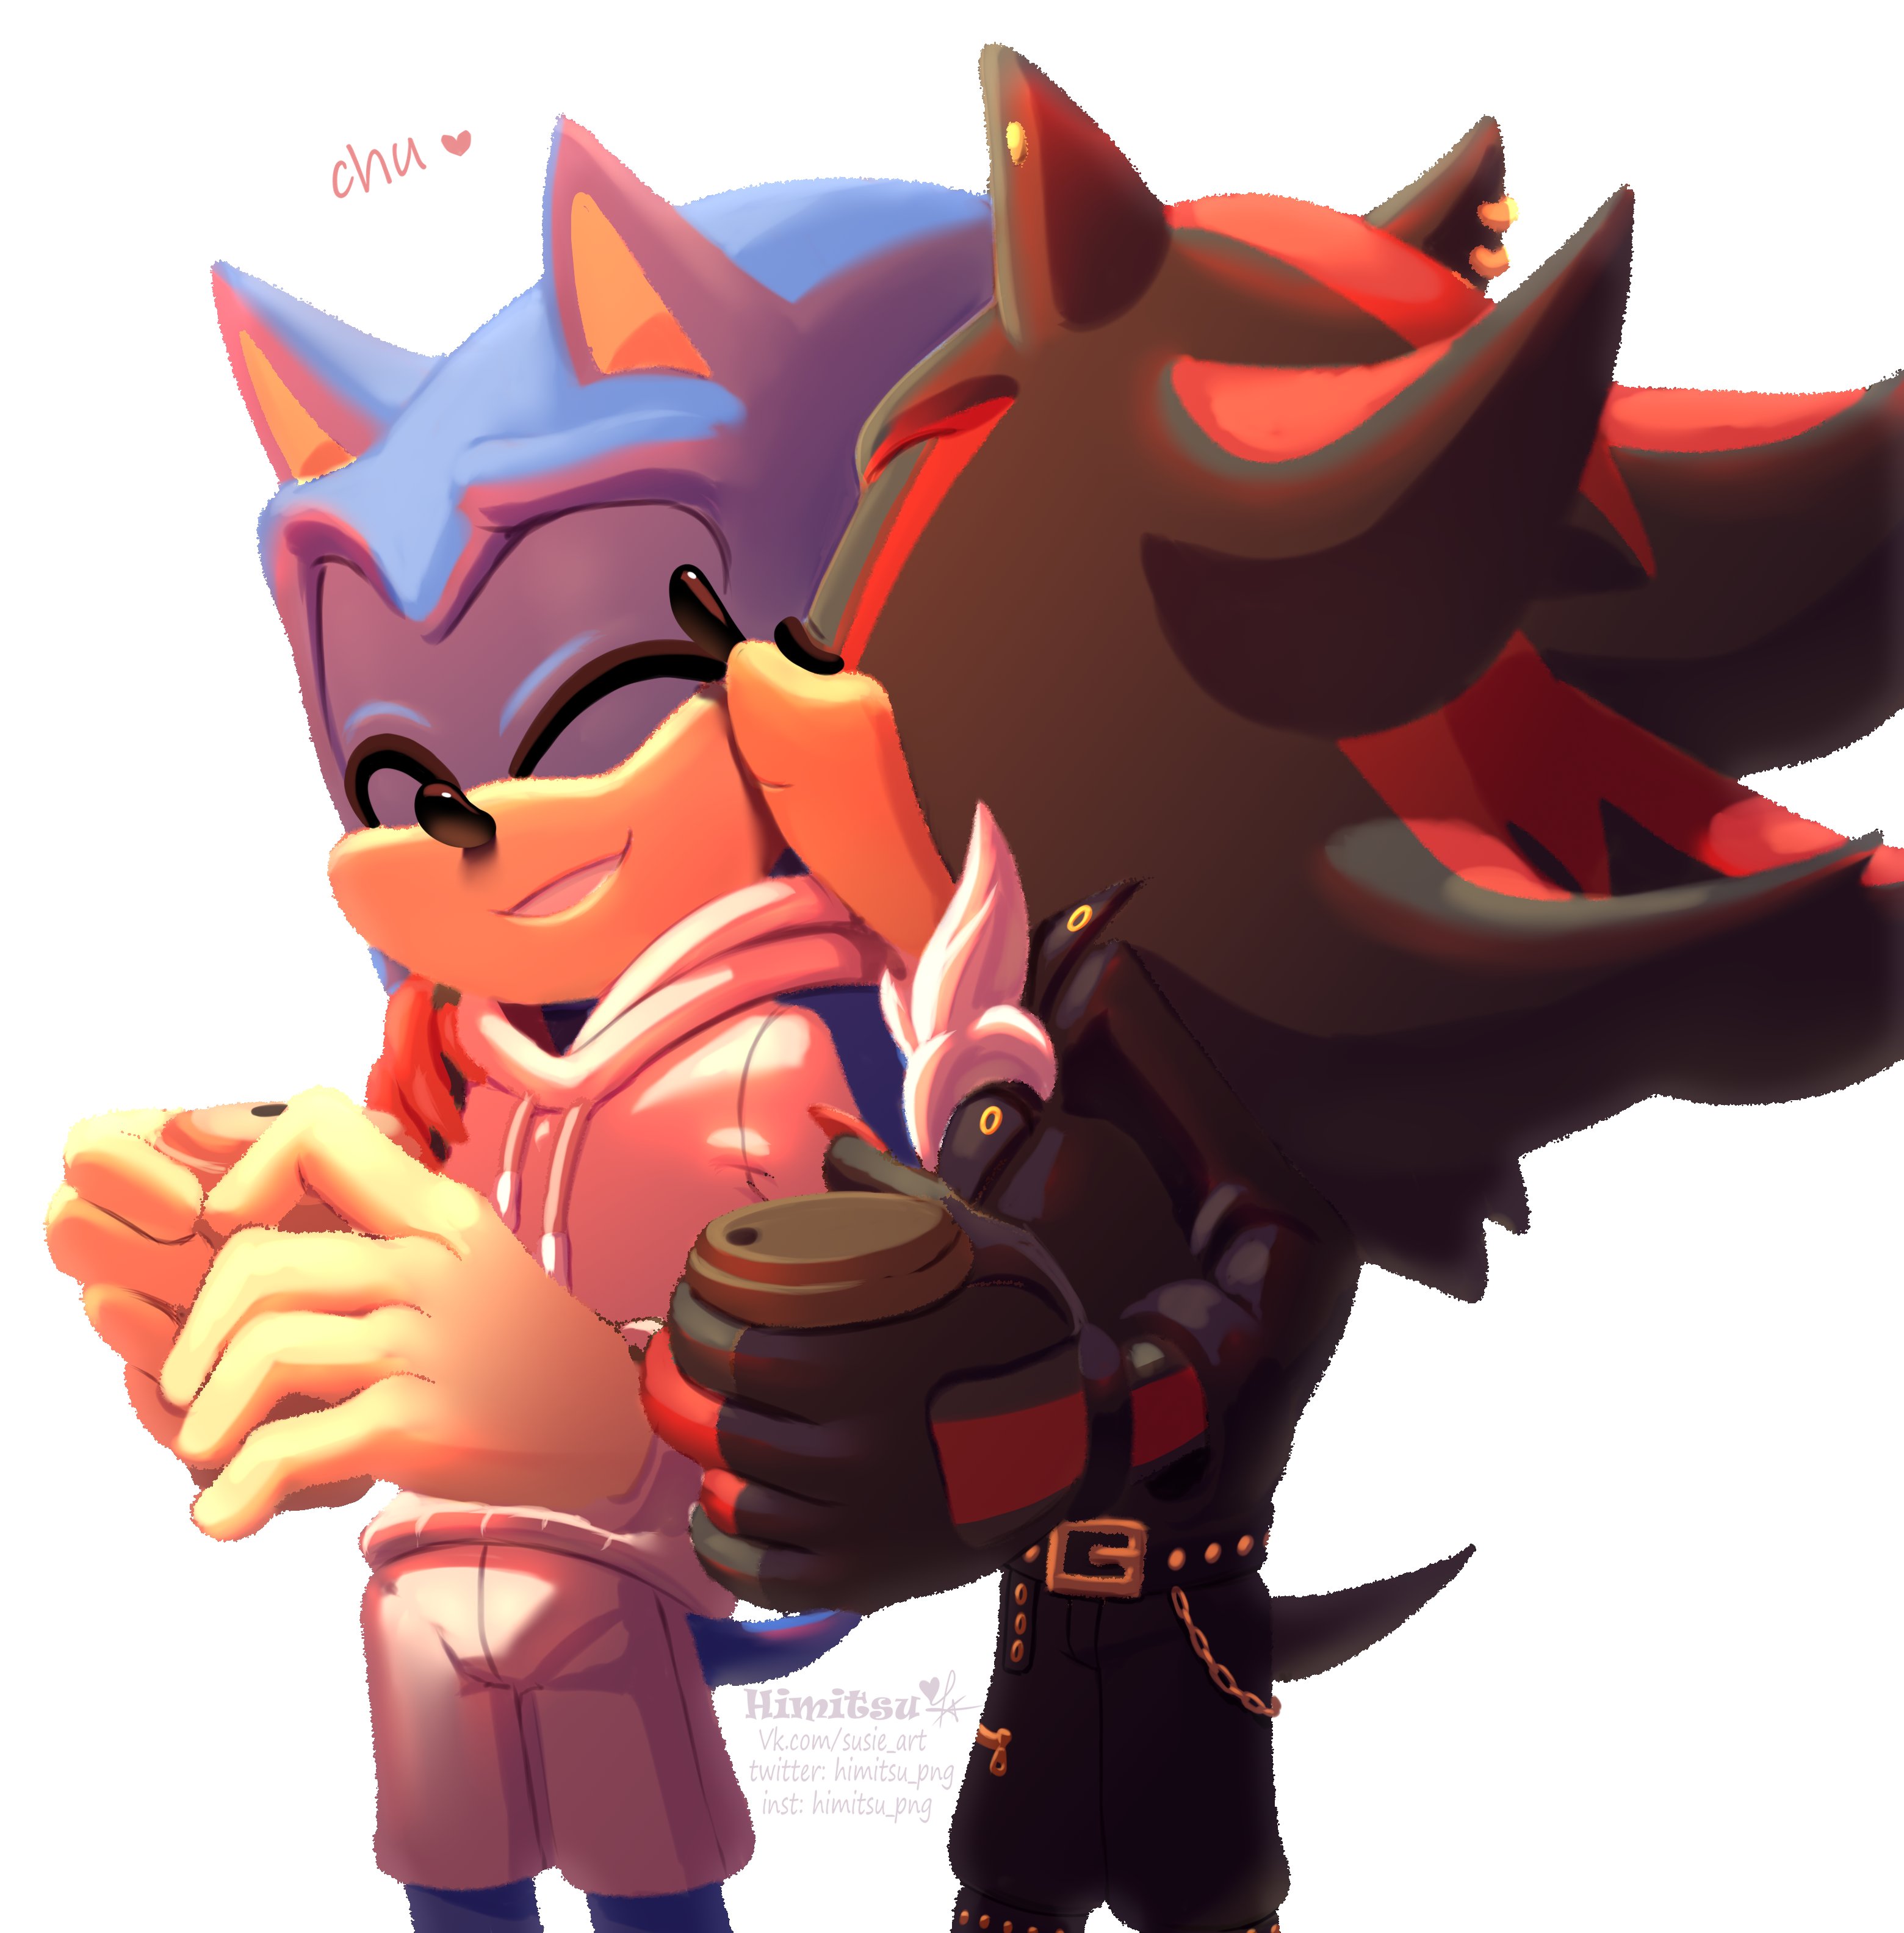 ℌ𝔦𝔪𝔦𝔱𝔰𝔲 (COMMS OPEN) on X: This is the first time they've seen a kiss  on the cheek, and Sonic now wants to give it a try #sonadow #shadonic  #SonicTheHedgehog #ShadowTheHedgehog #sonic #shadow #